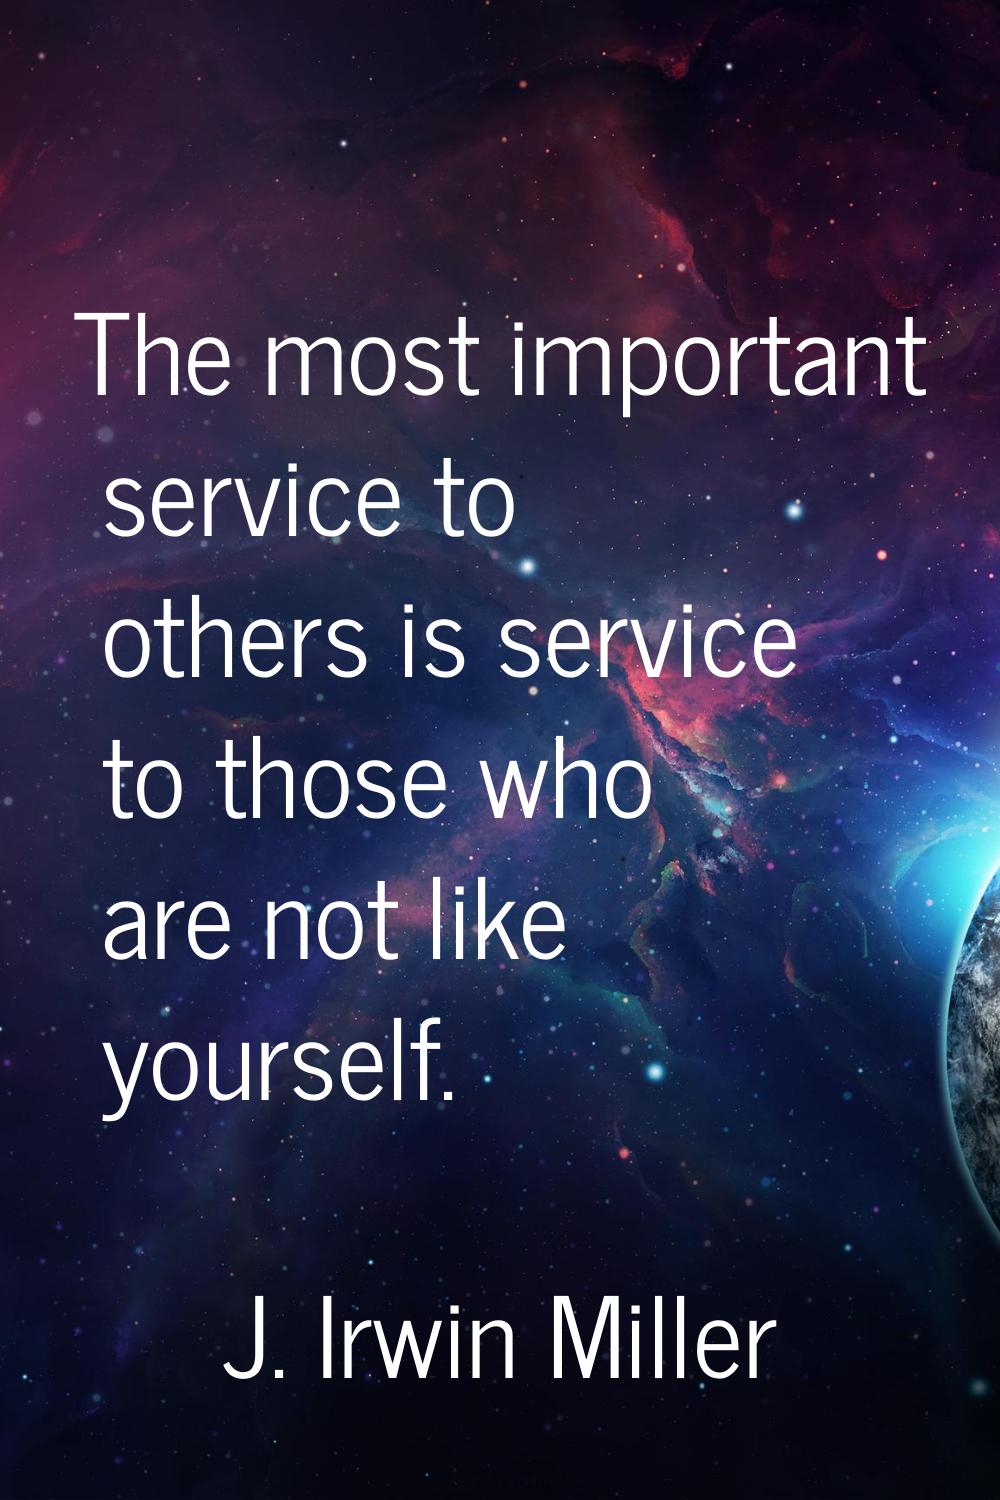 The most important service to others is service to those who are not like yourself.